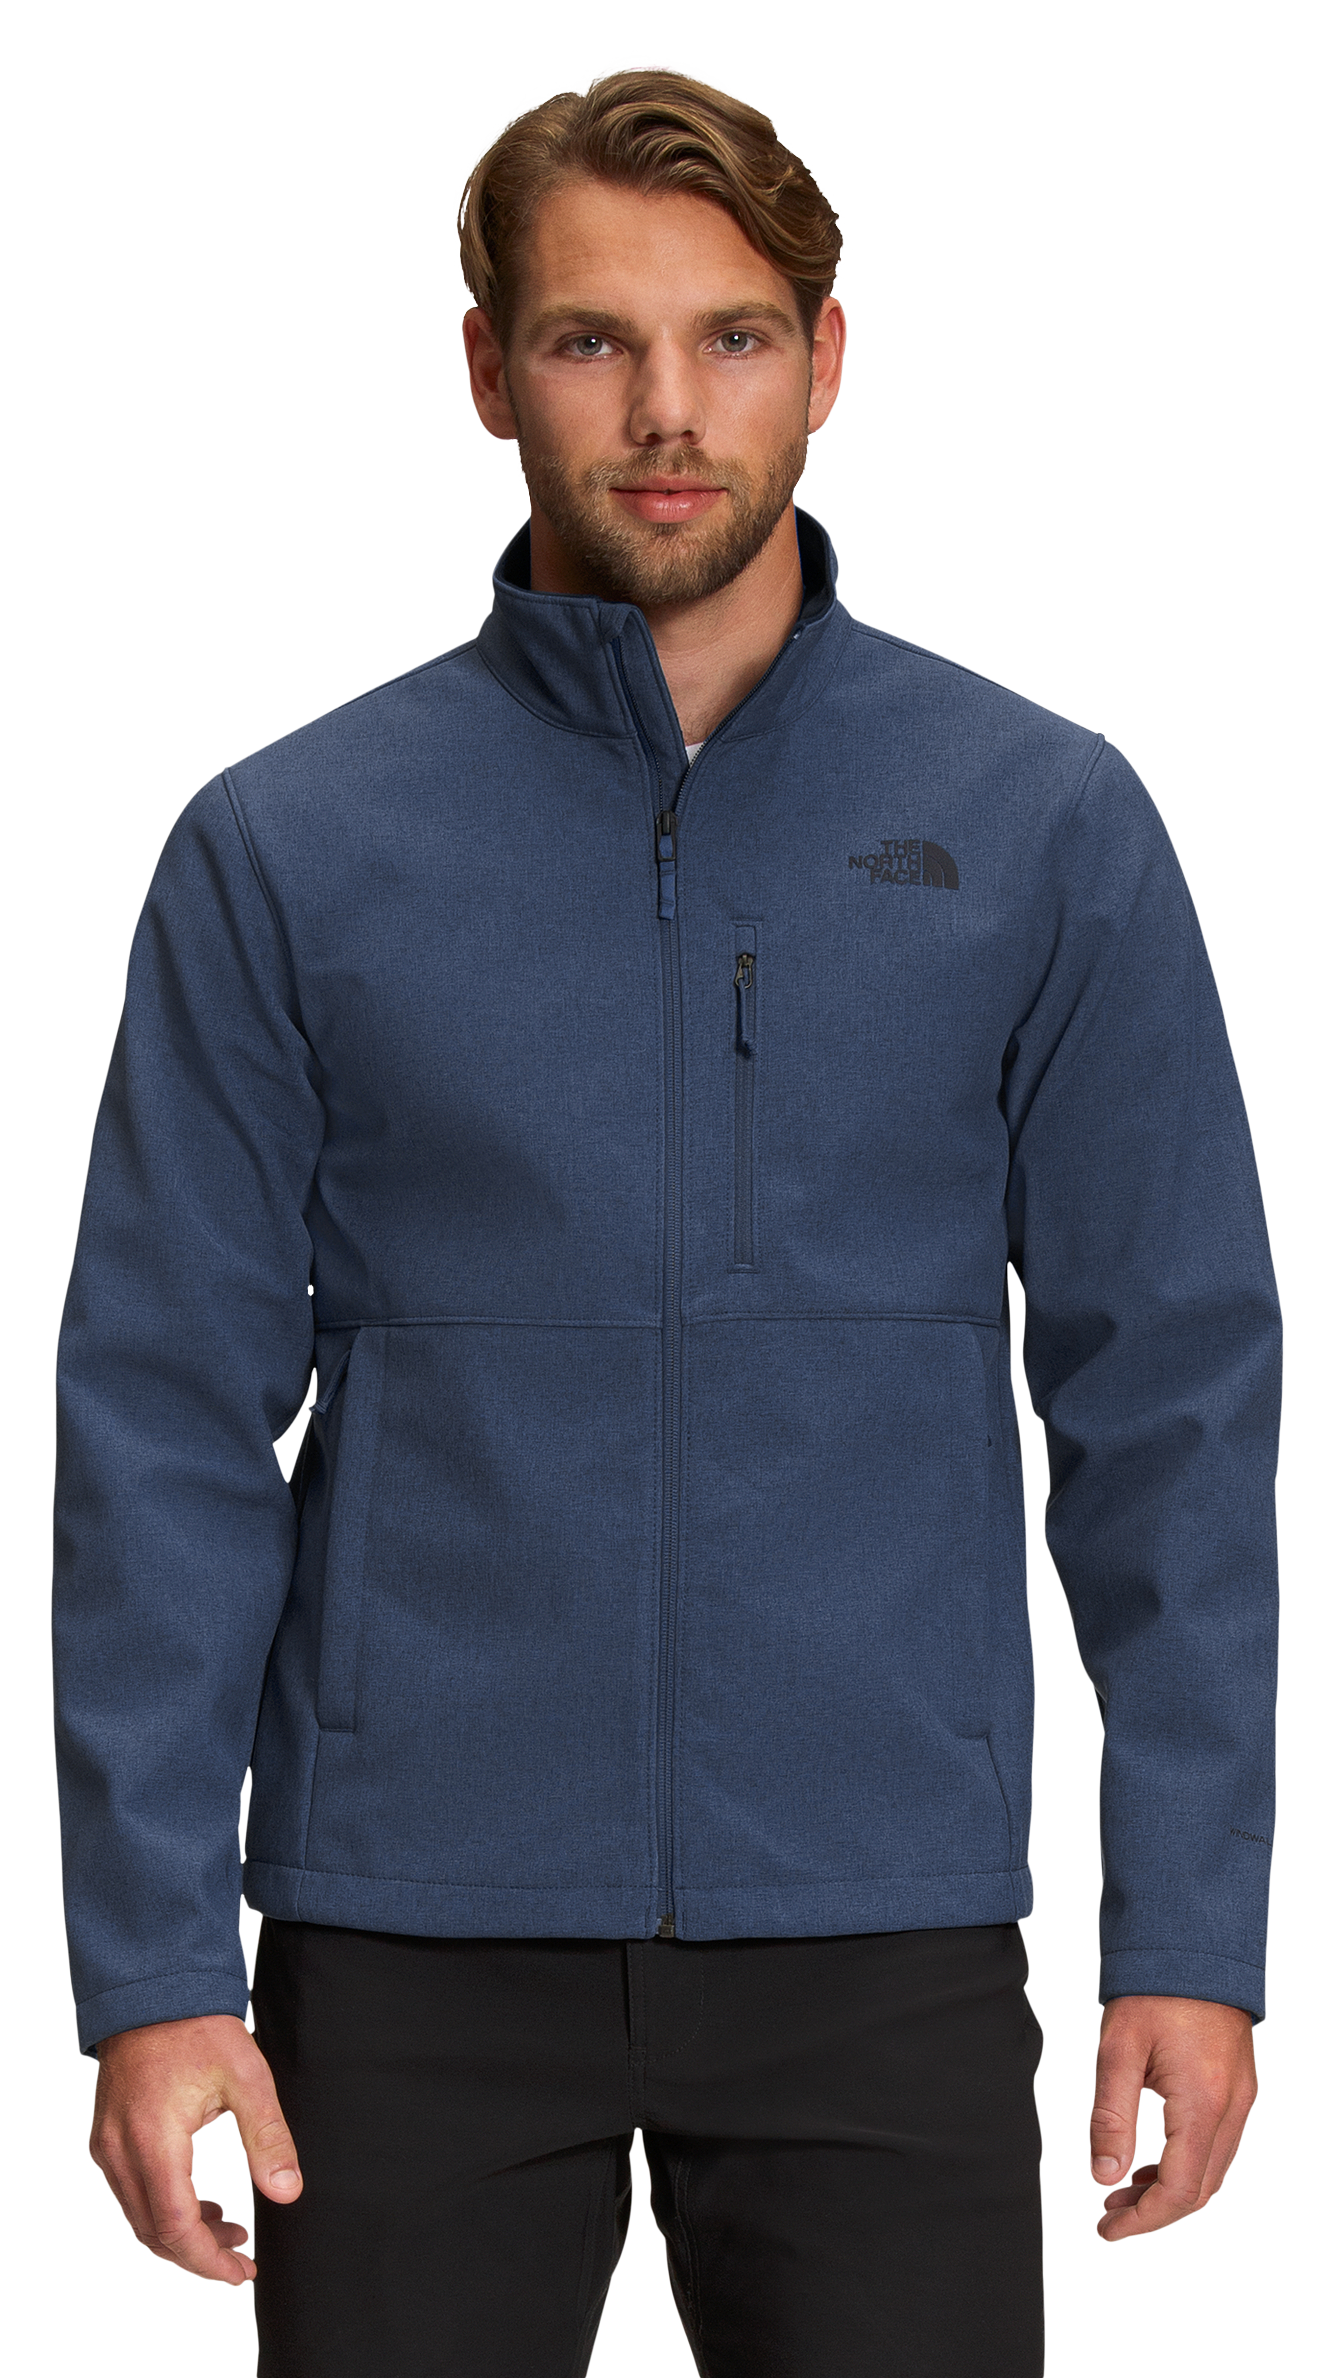 The North Face Apex Bionic 2 Jacket for Men